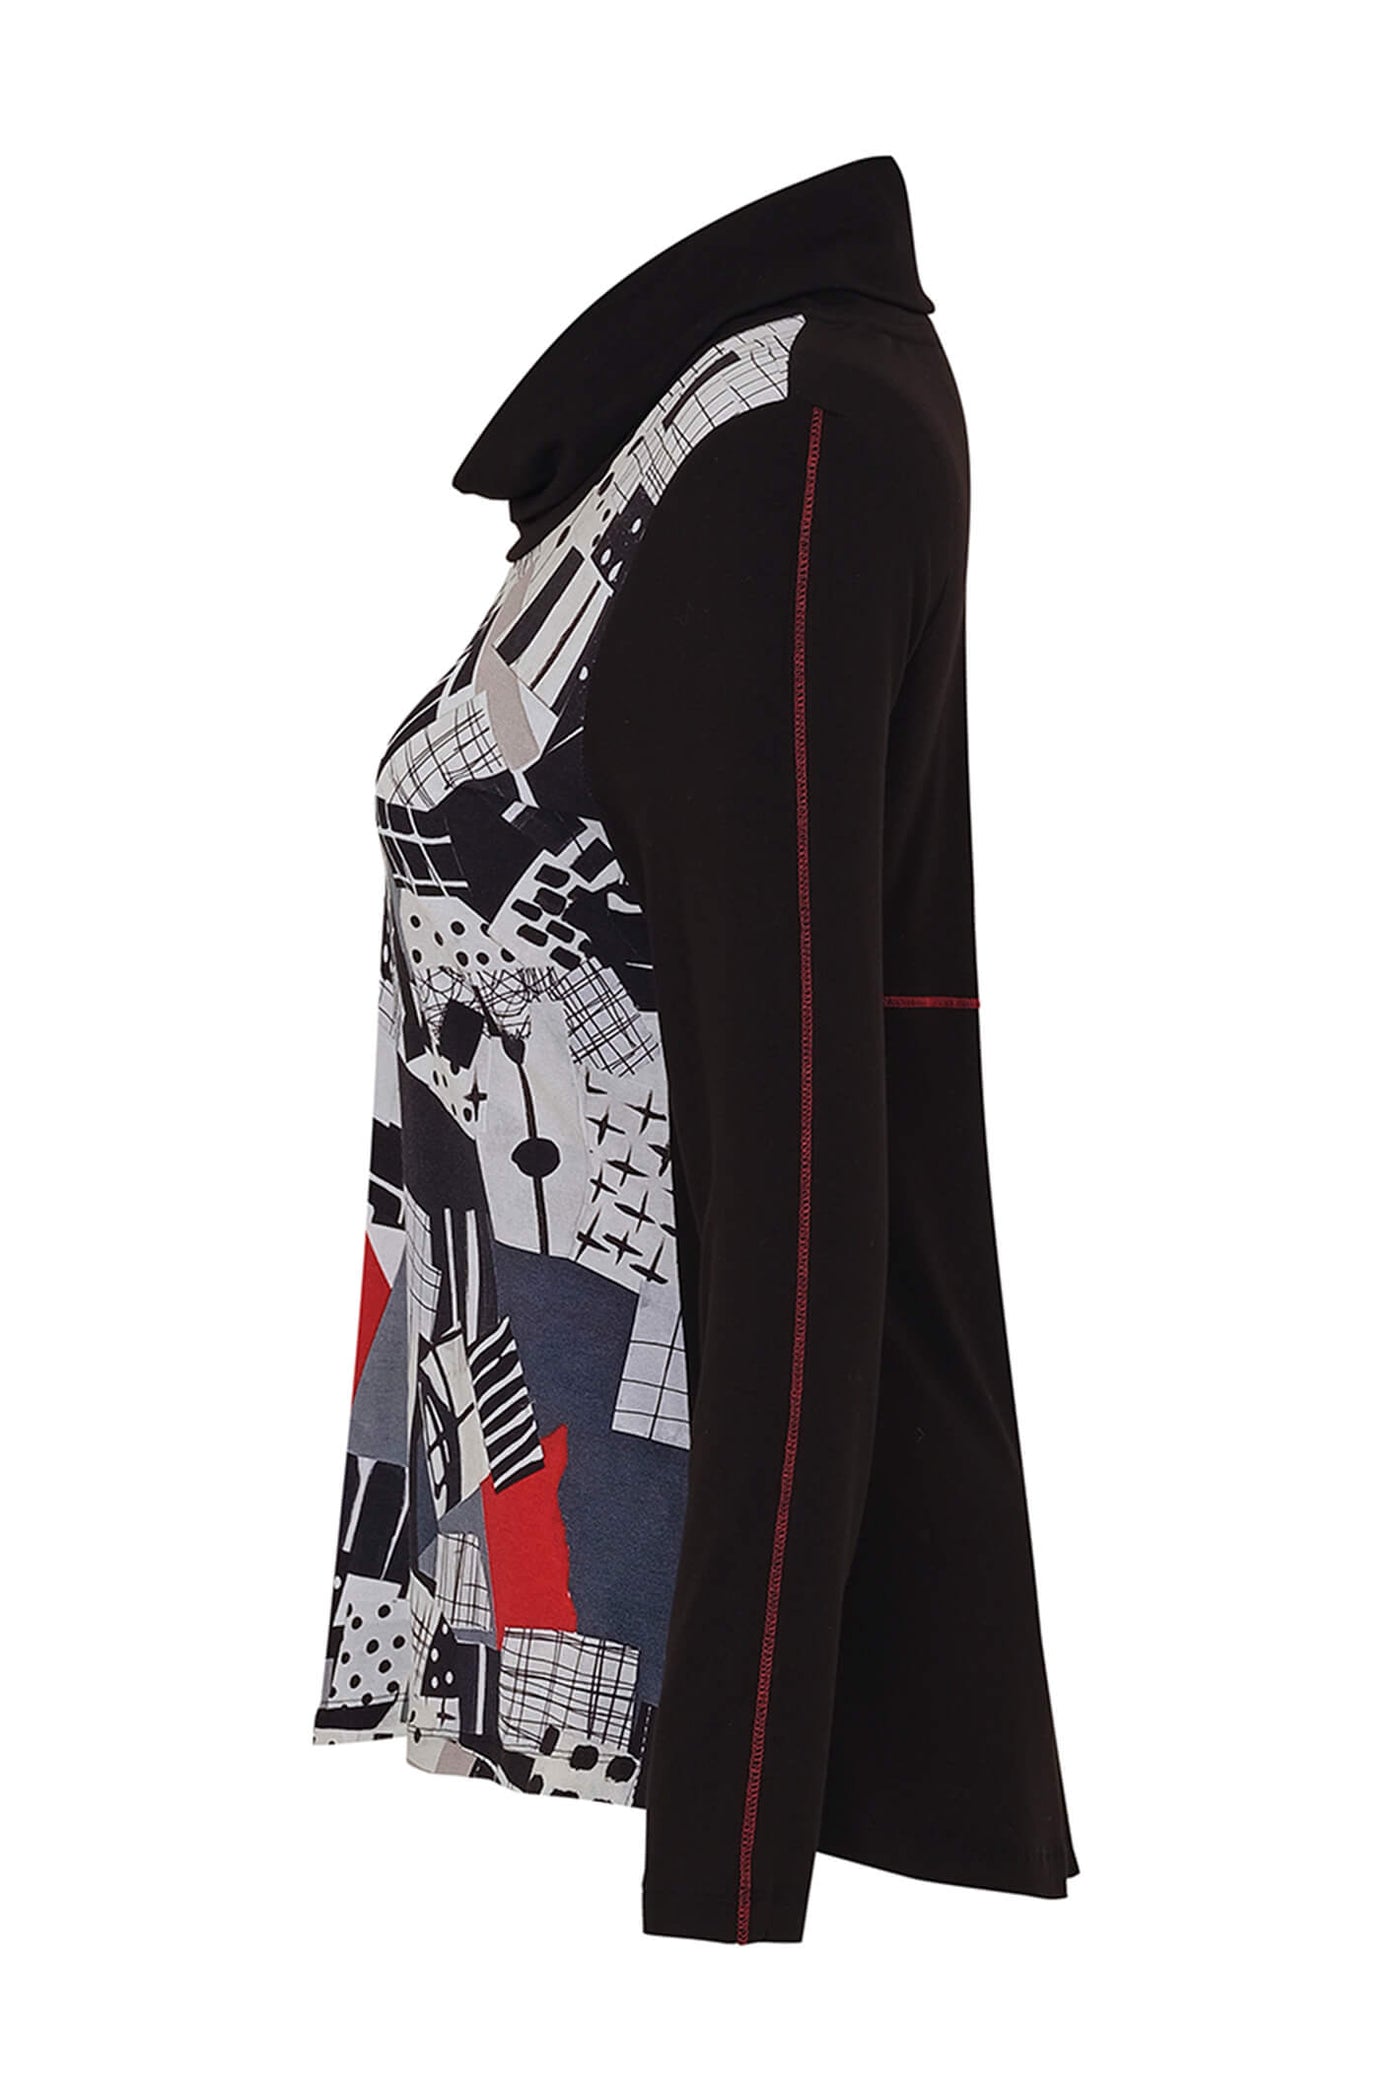 Dolcezza 73602 Black Tear Down The Wall Print Cowl Neck Top - Rouge Boutique